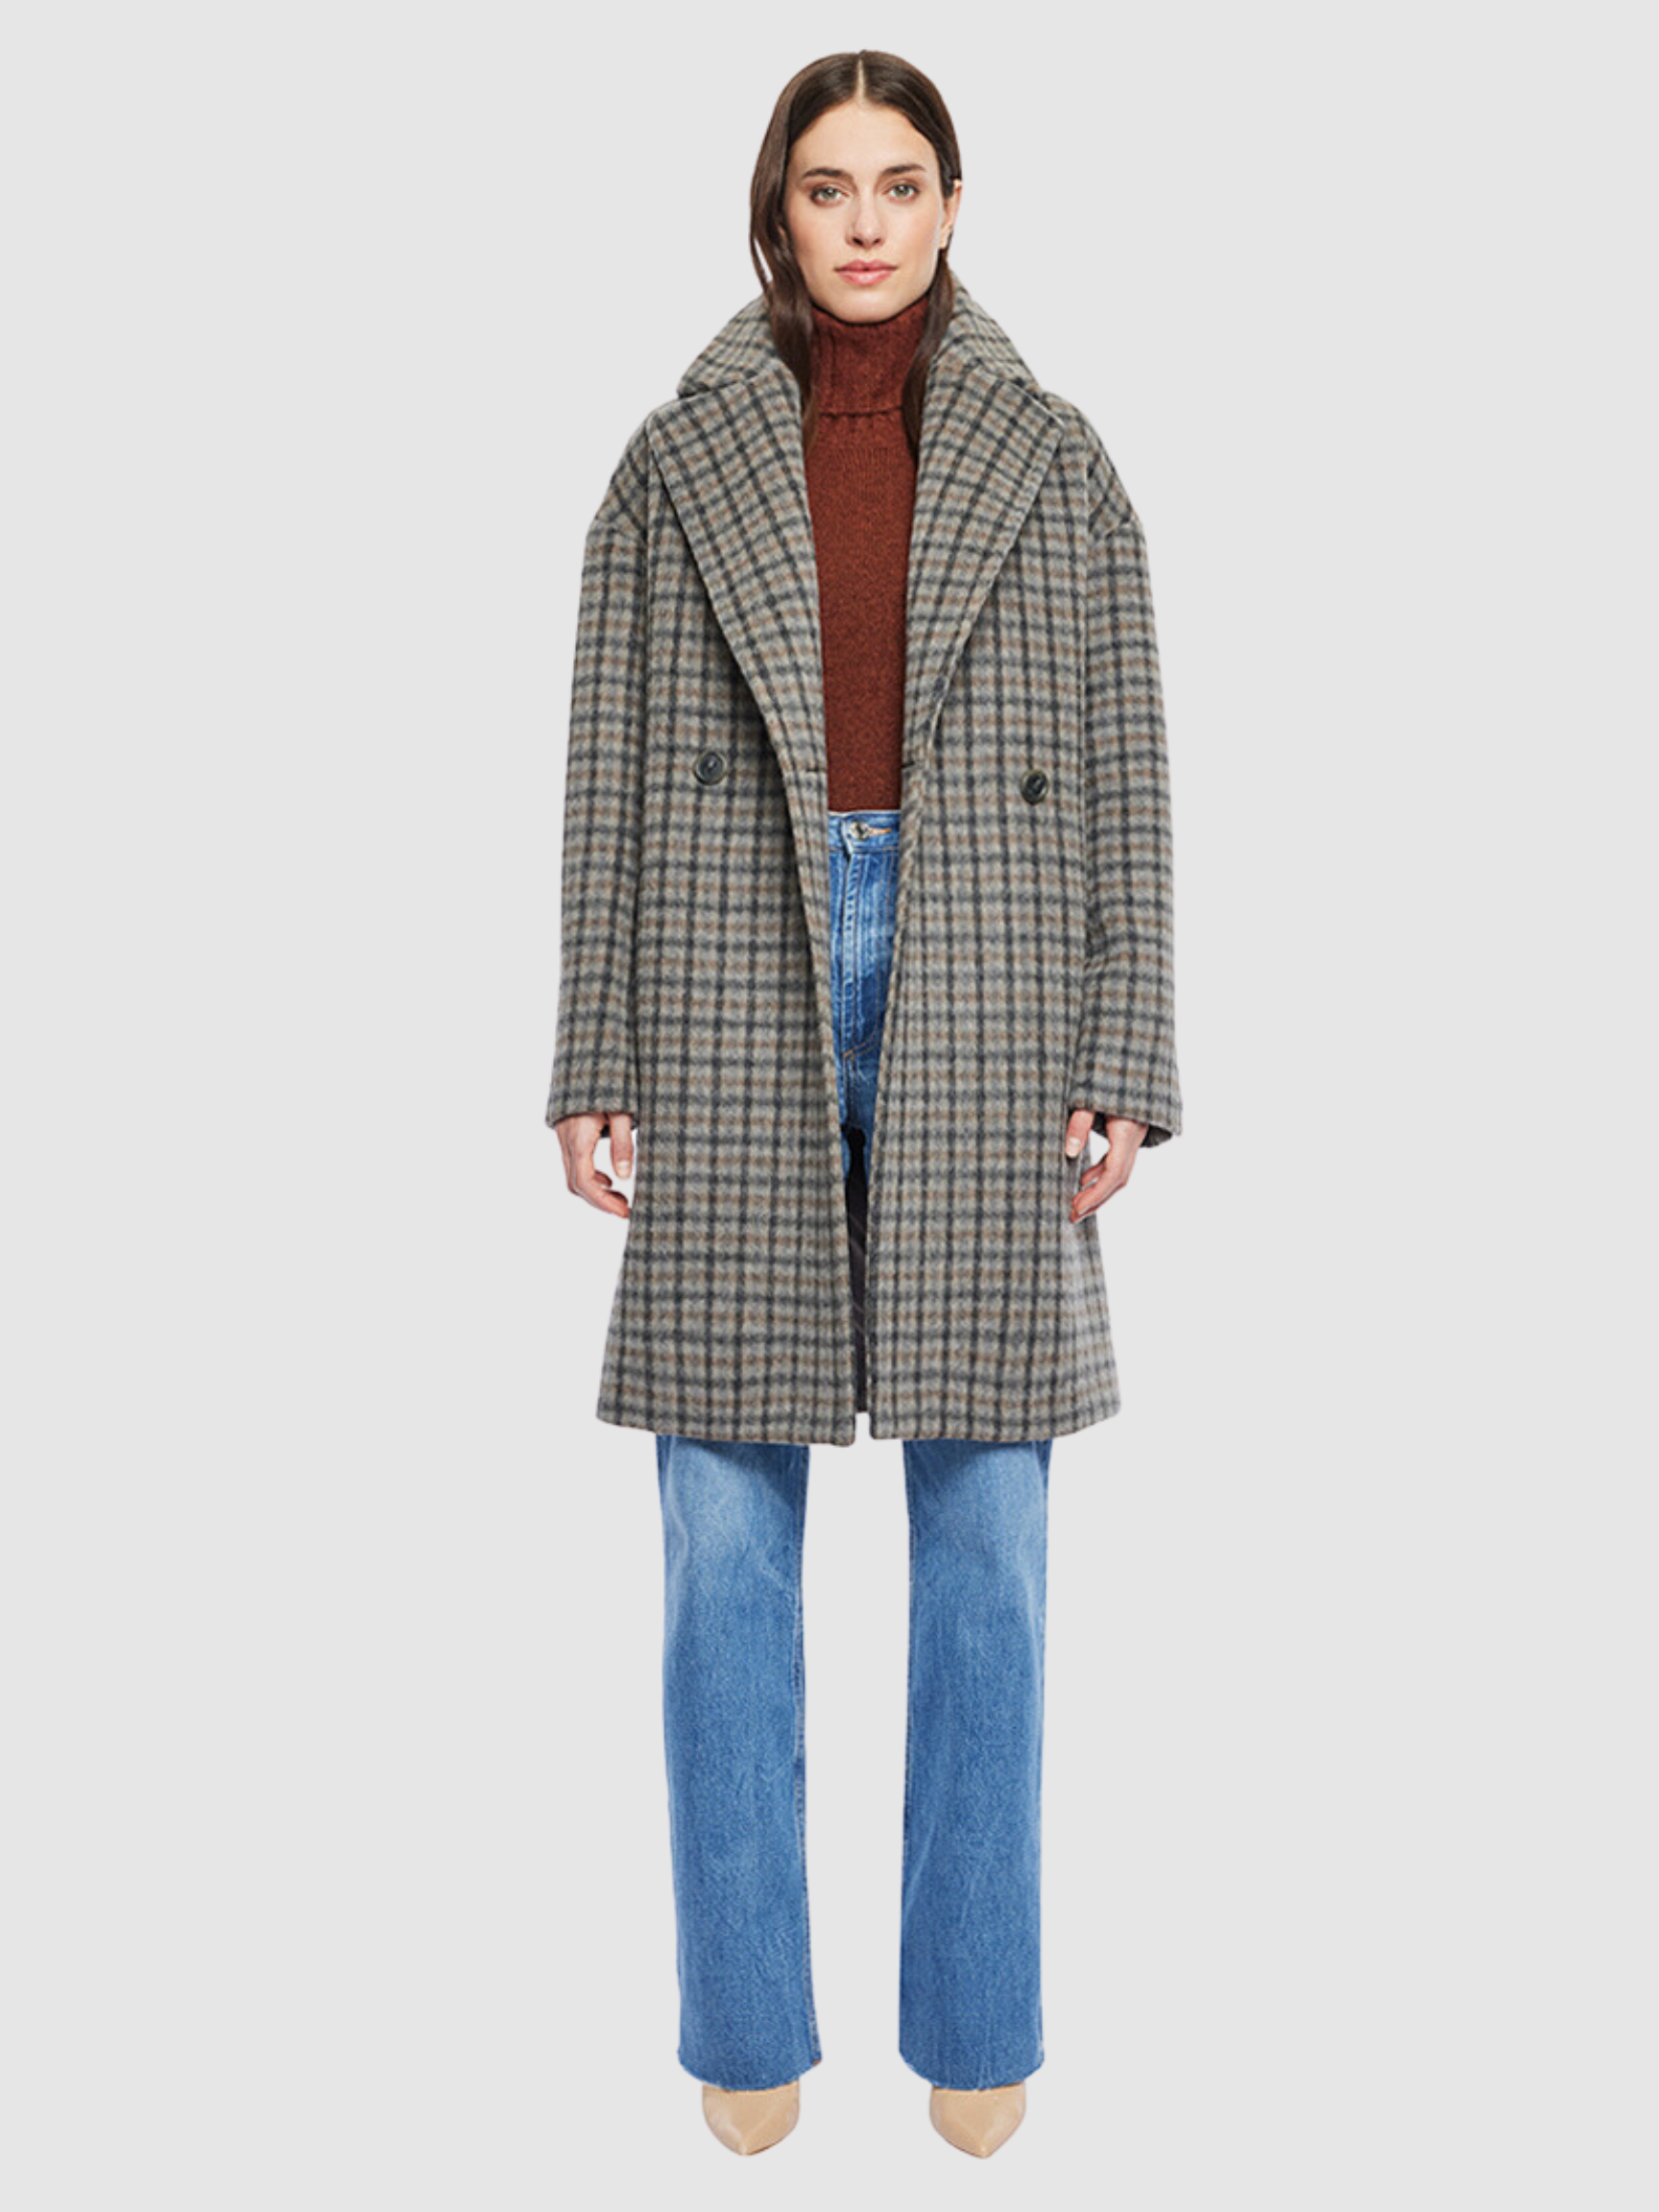 HiSO 2150 Grey Check Coat-Coats-West of Woodward Boutique-Vancouver-Canada